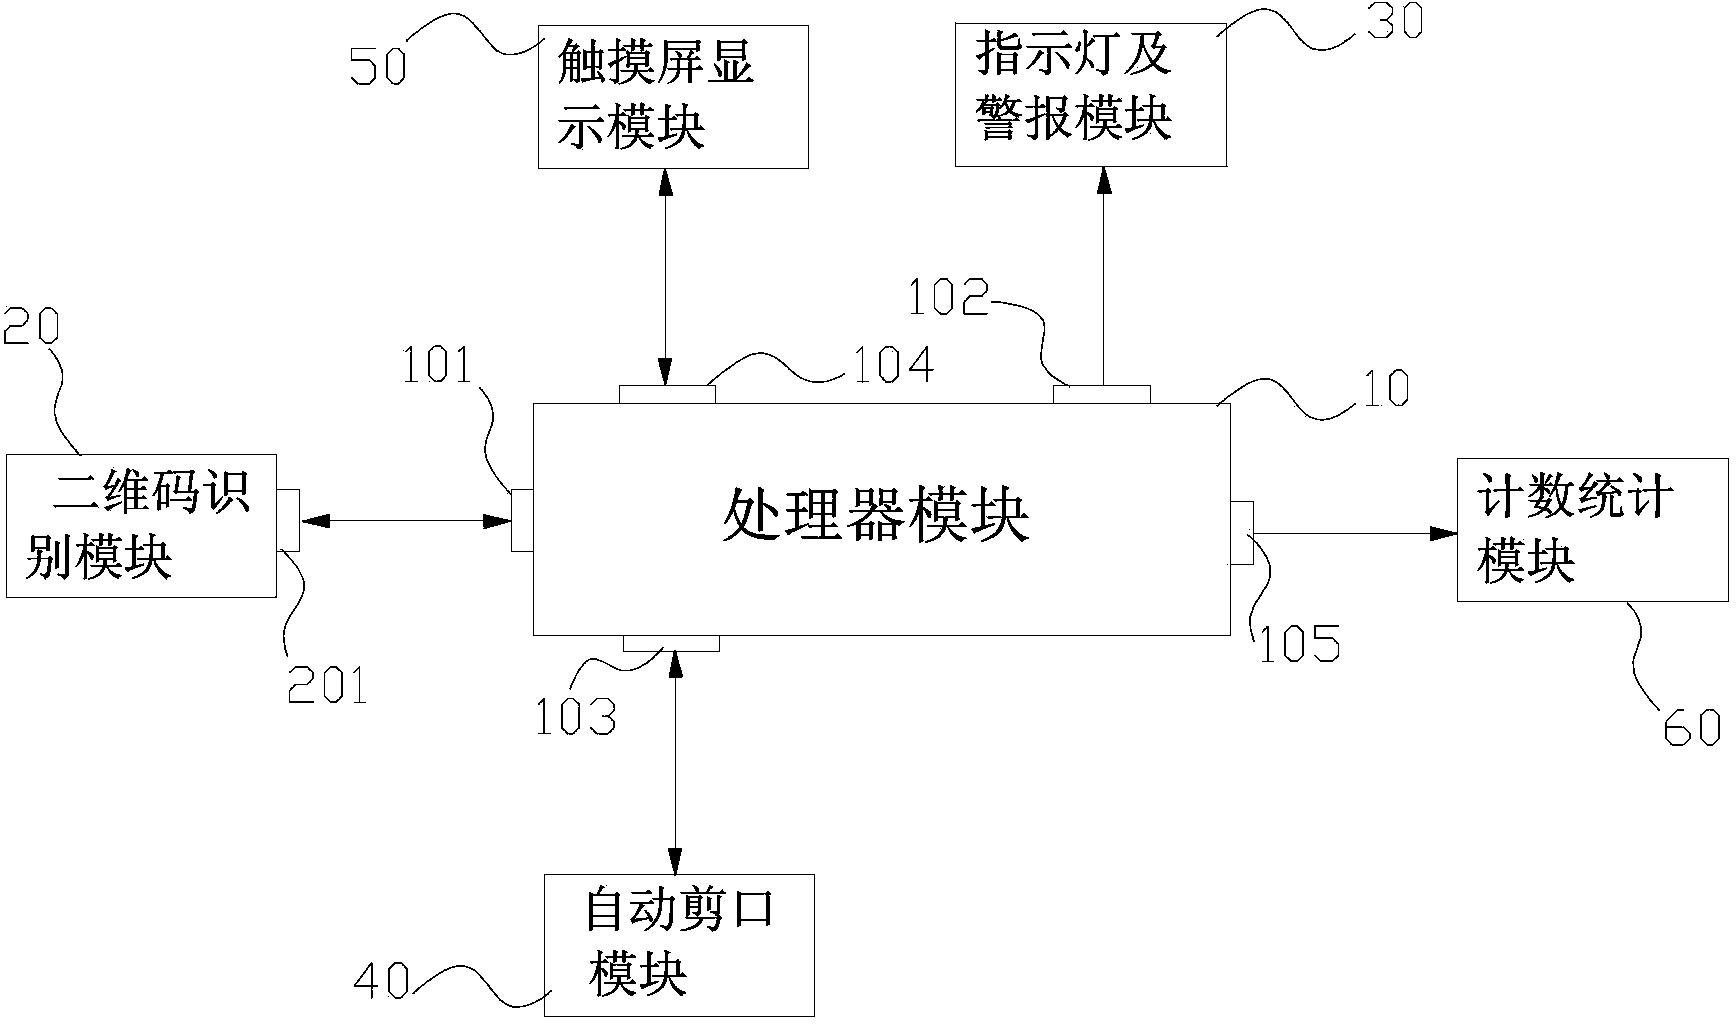 Multifunctional ticket checking system and ticket checking method for railway passenger station